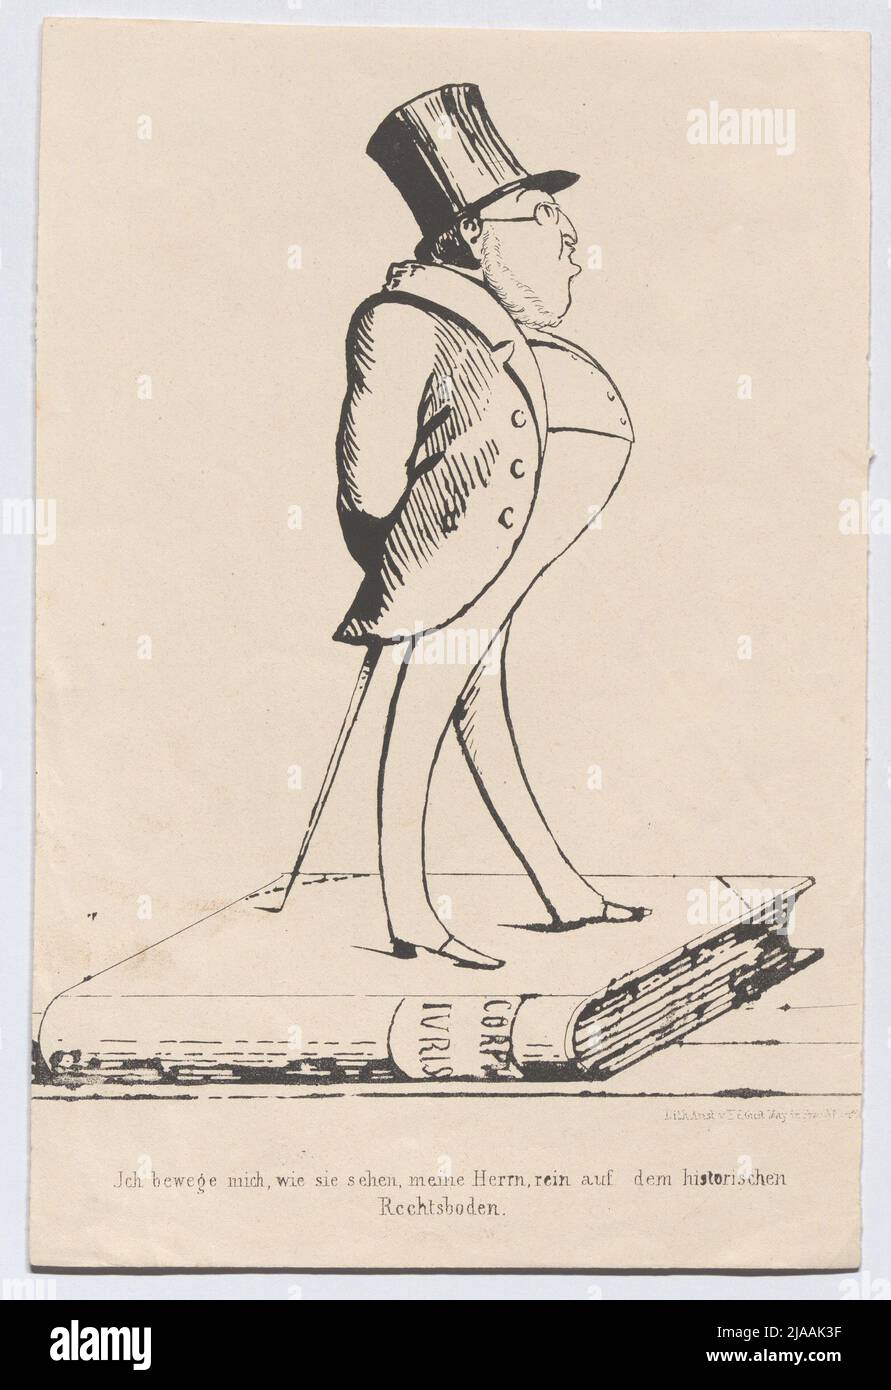 'I move as you see, gentlemen, purely on the historical / right floor.' (Caricature on Georg von Vincke, MP of the National Assembly in Frankfurt 1848). Gerhard Malß (1819-1885), Lithographer, Eduard Gustav May (1818-1907), publisher Stock Photo